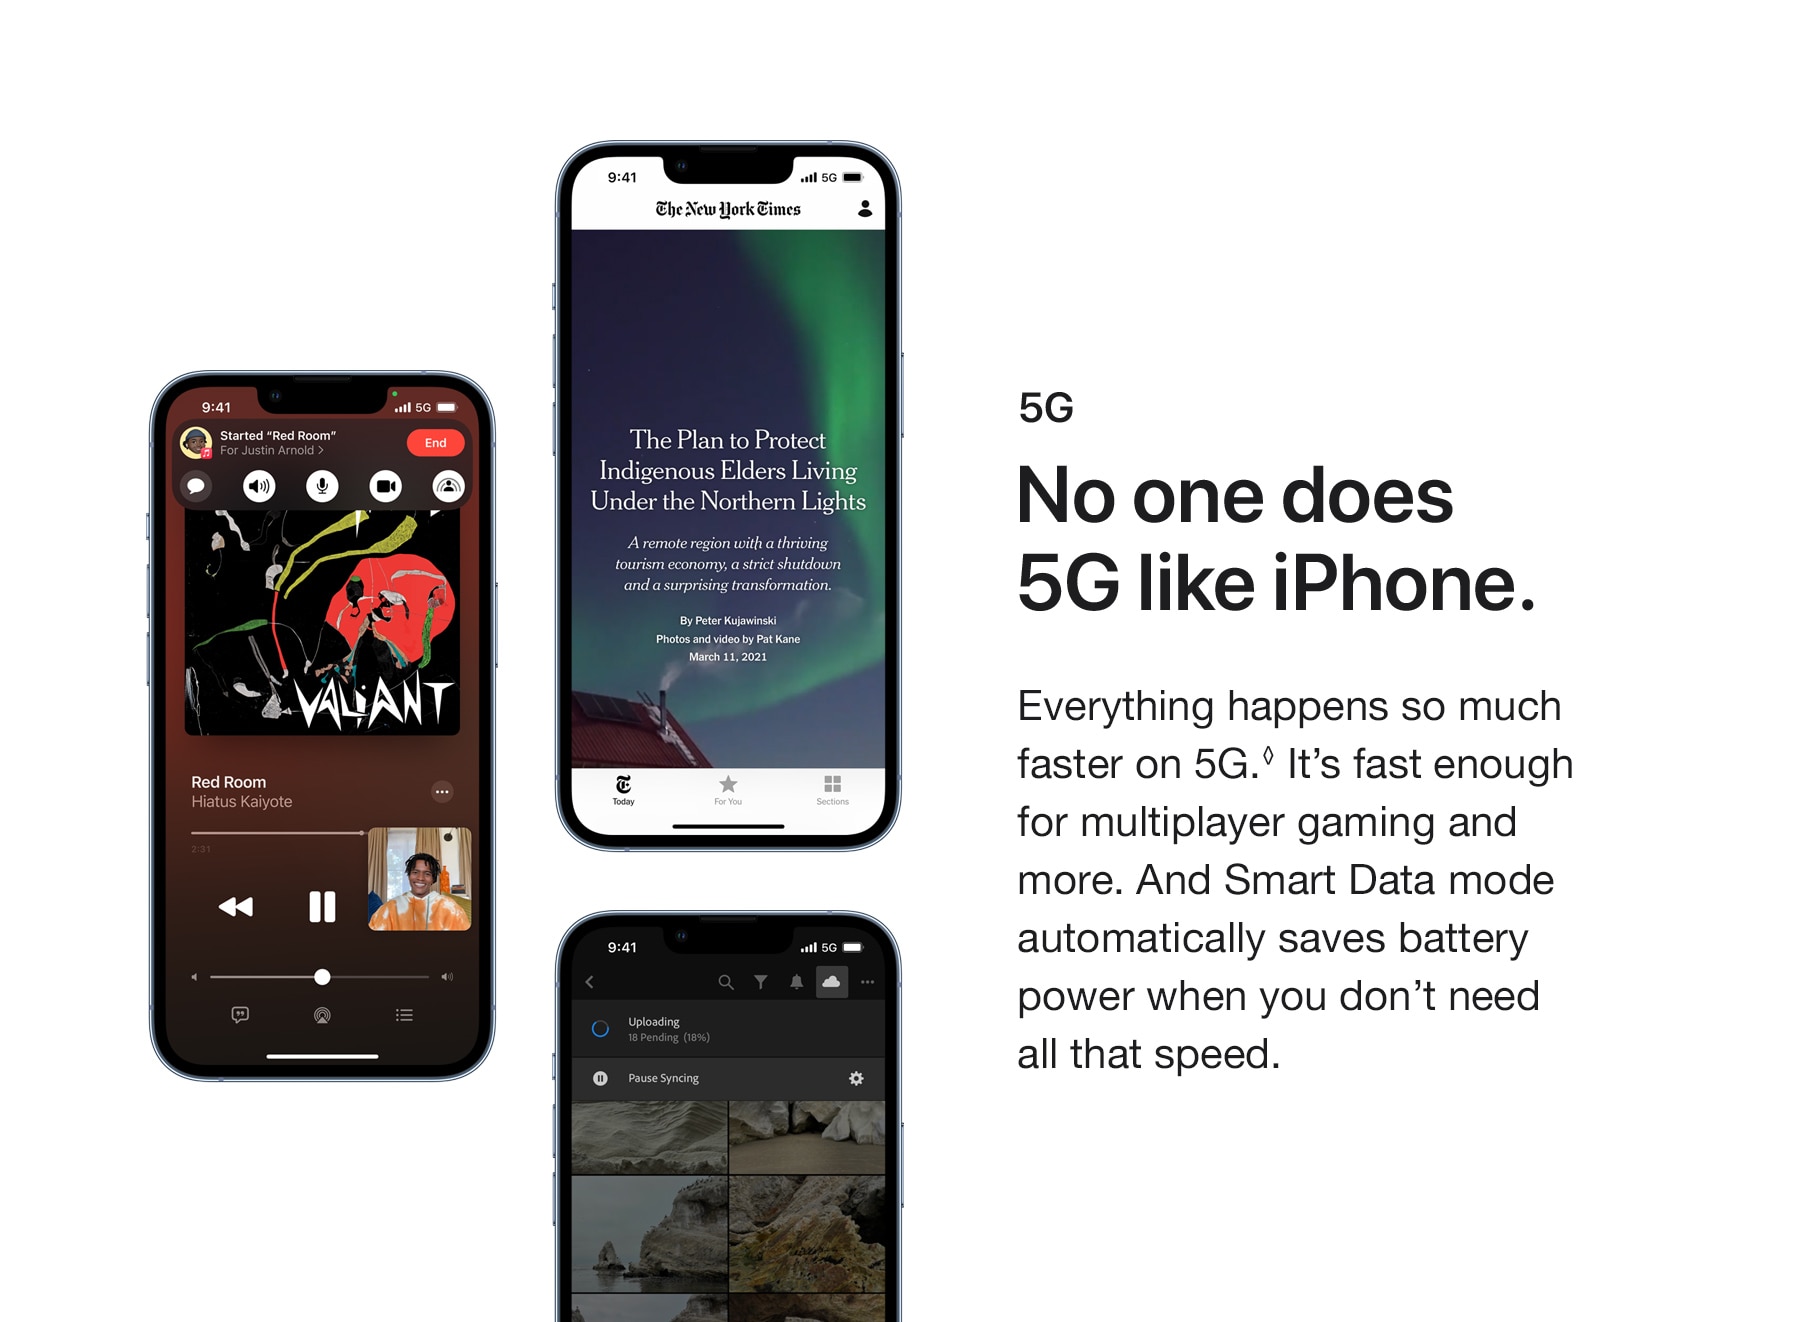 5G. No one does 5G like iPhone. Everything happens so much faster on 5G. It's fast enough for multiplayer gaming and more. And Smart Data mode automatically saves battery power when you don't need all that speed.